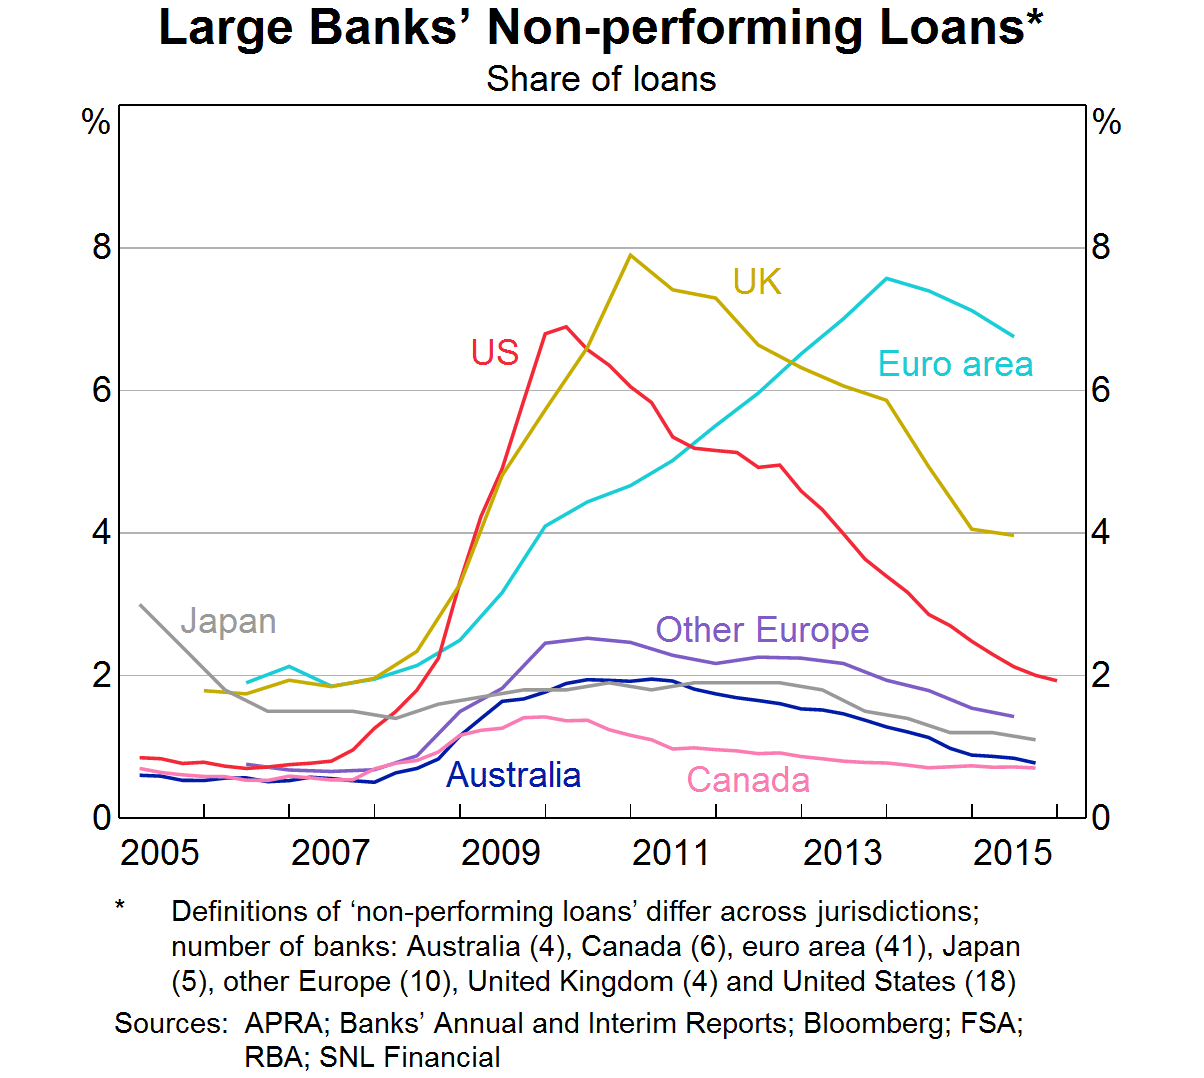 Graph 1: Large Banks' Non-performing Loans